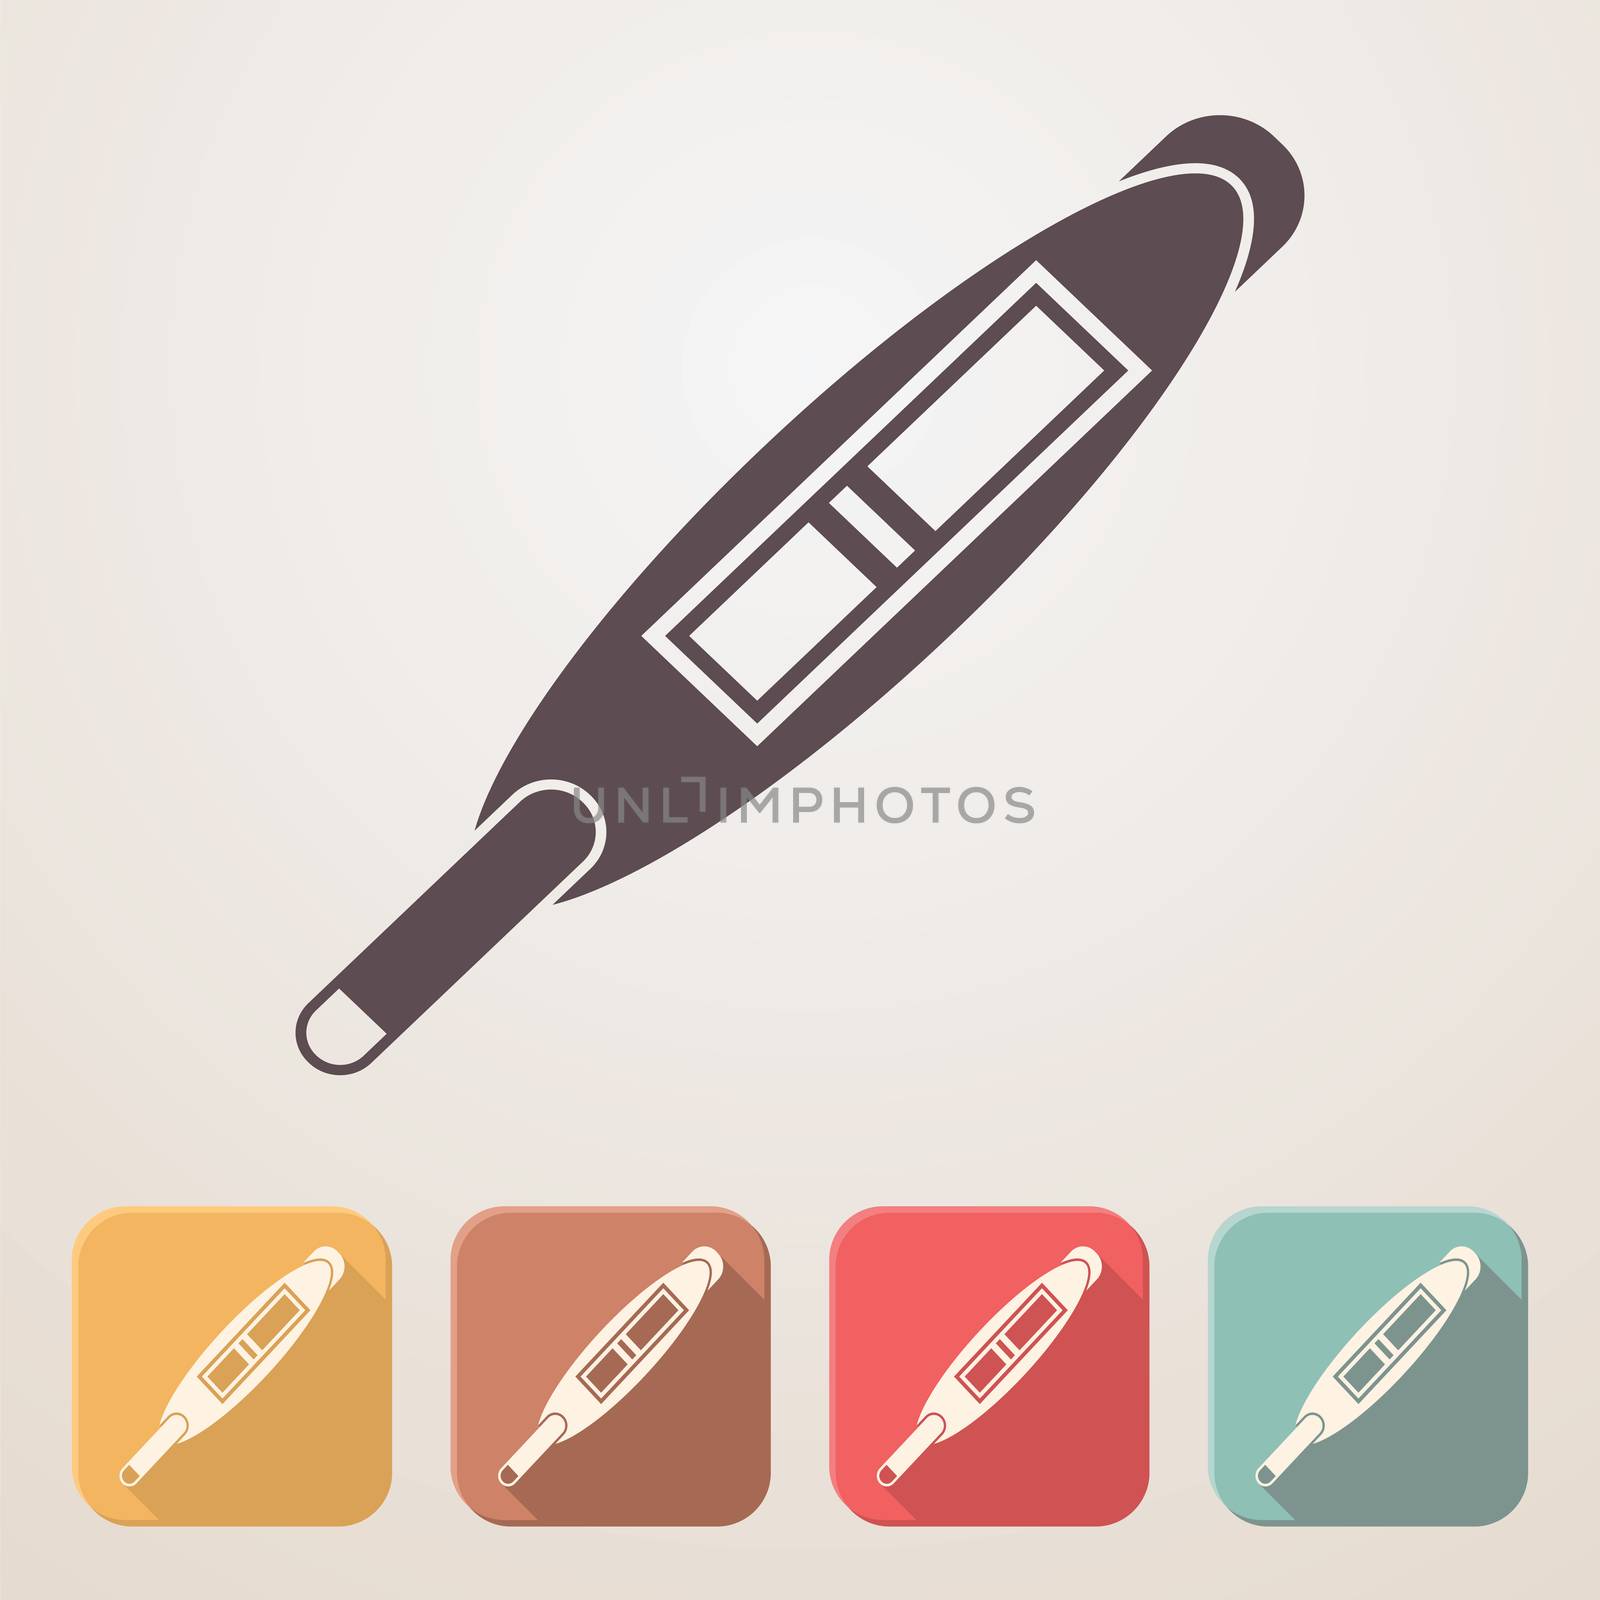 Pregnancy test flat icon set in color boxes with shadow.